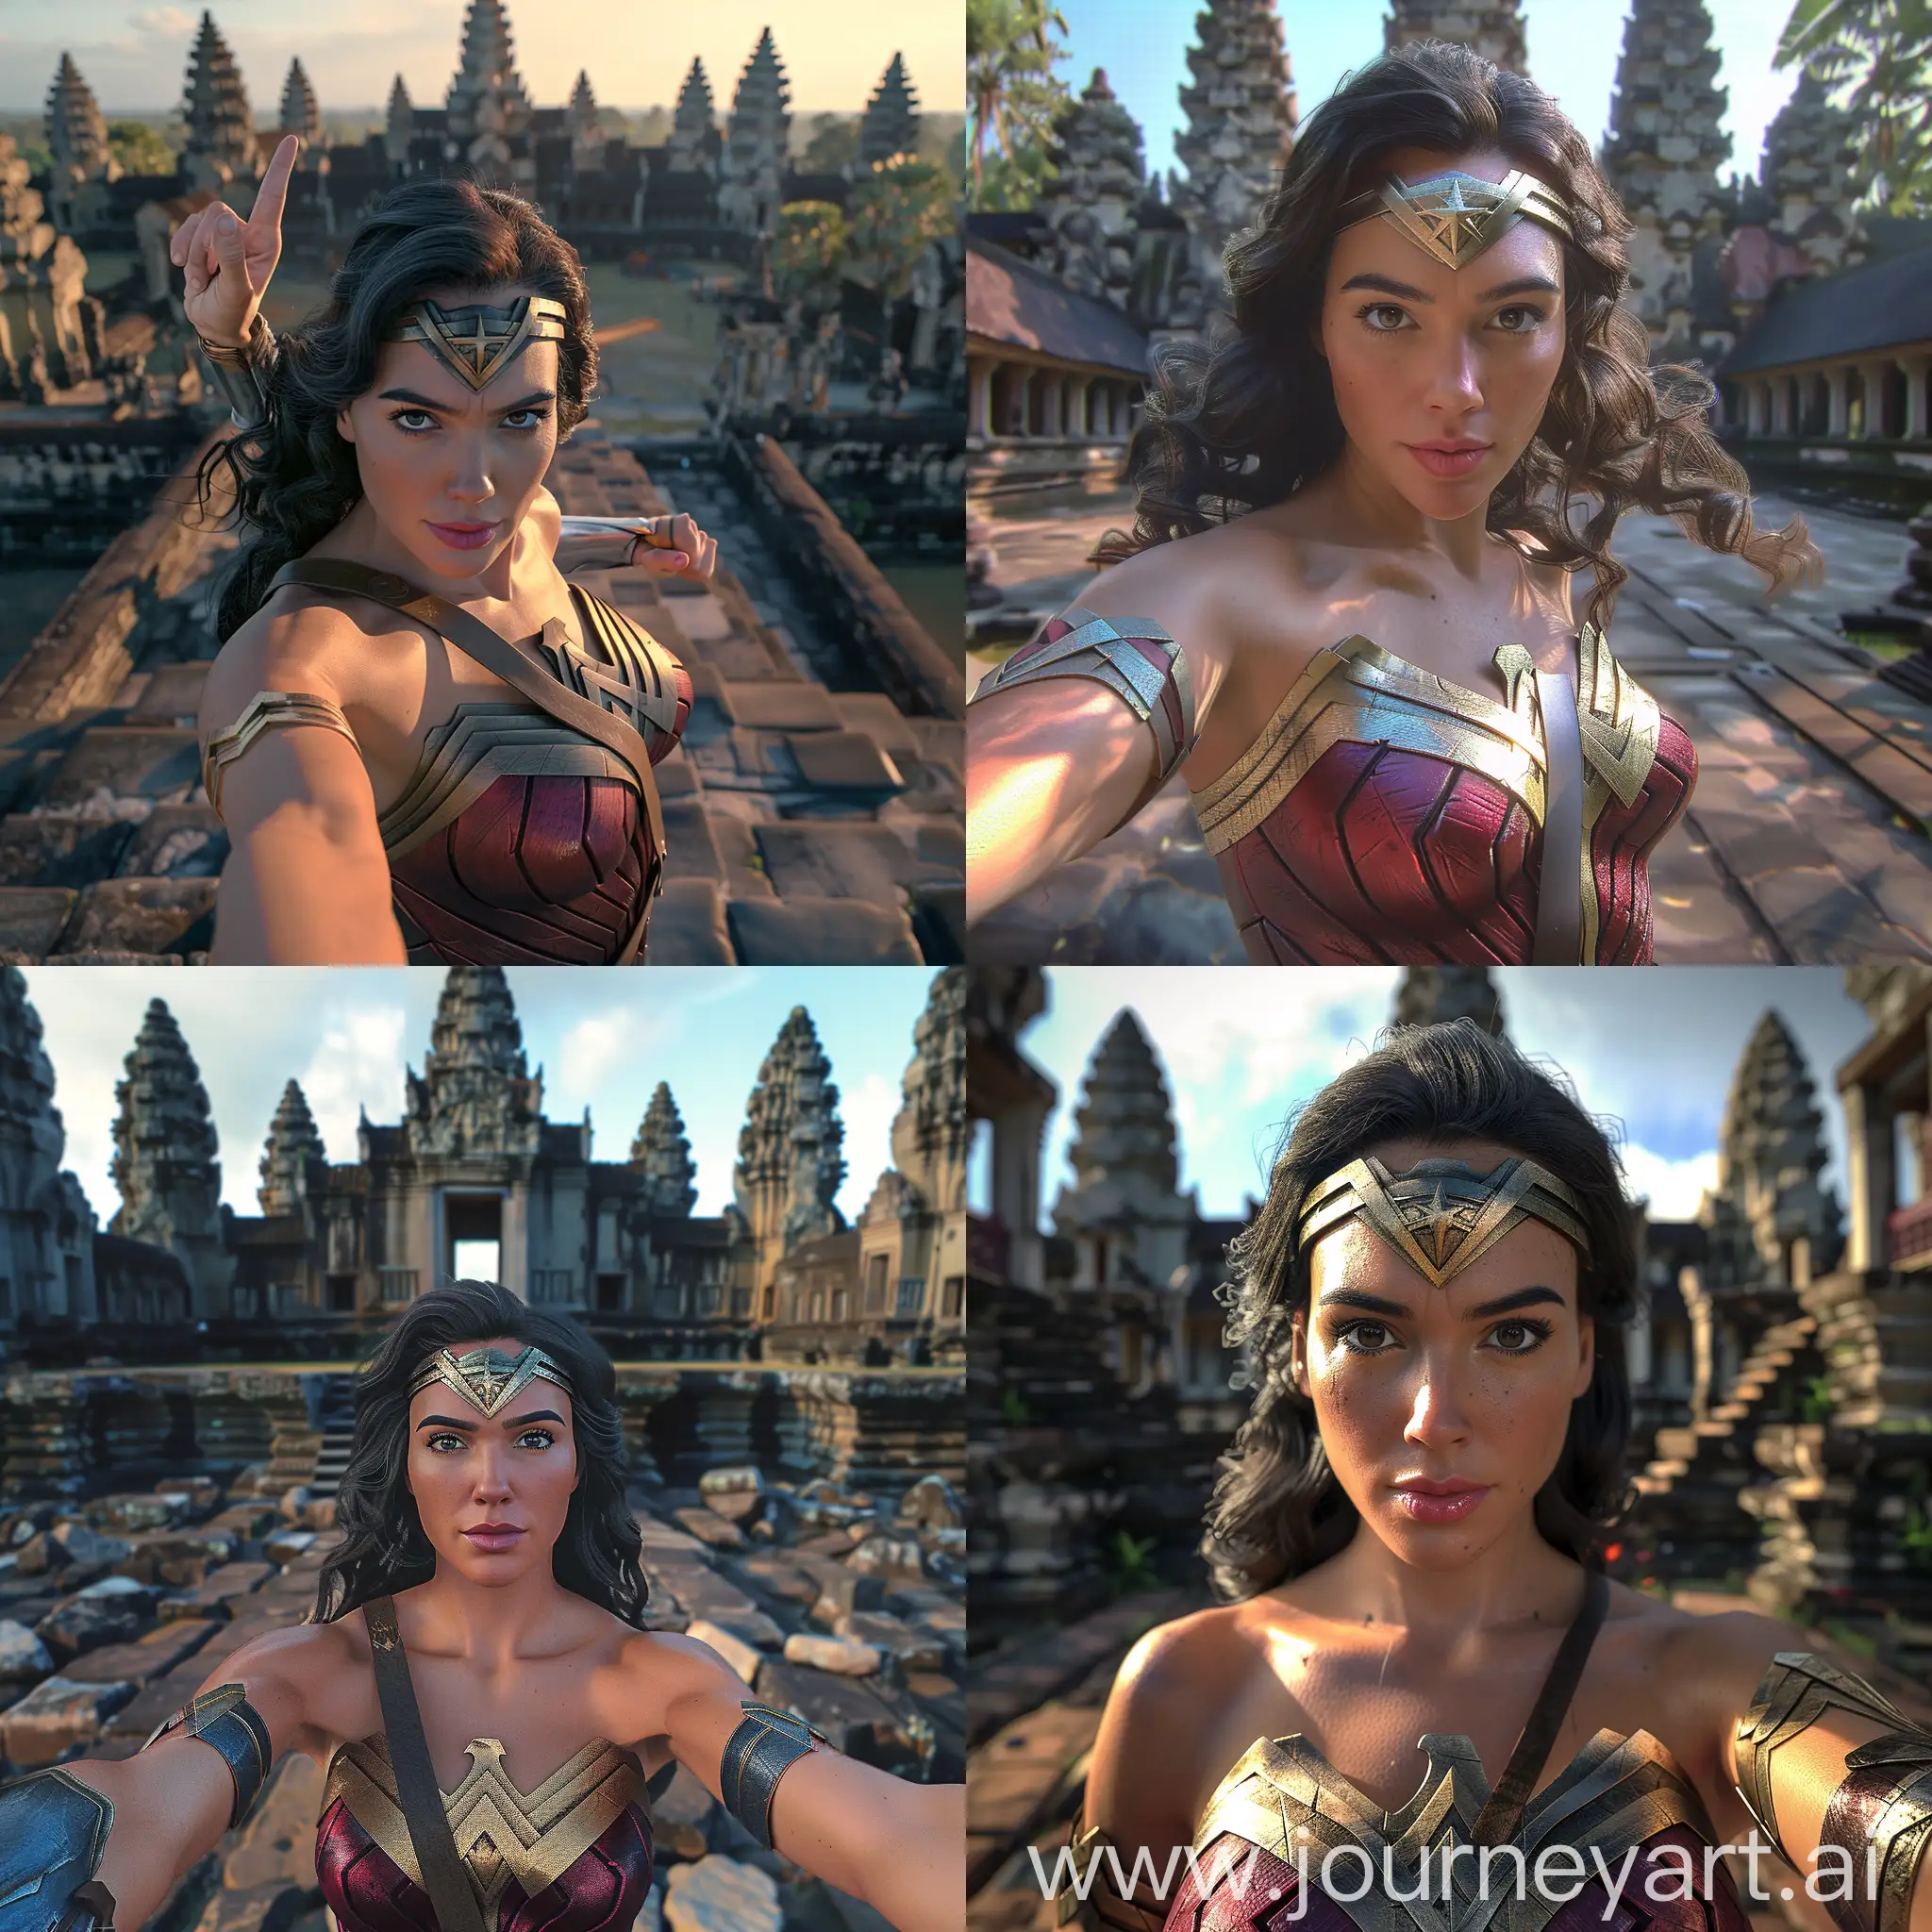 Indonesian-Temple-Selfie-with-Wonder-Woman-in-Natural-Lighting